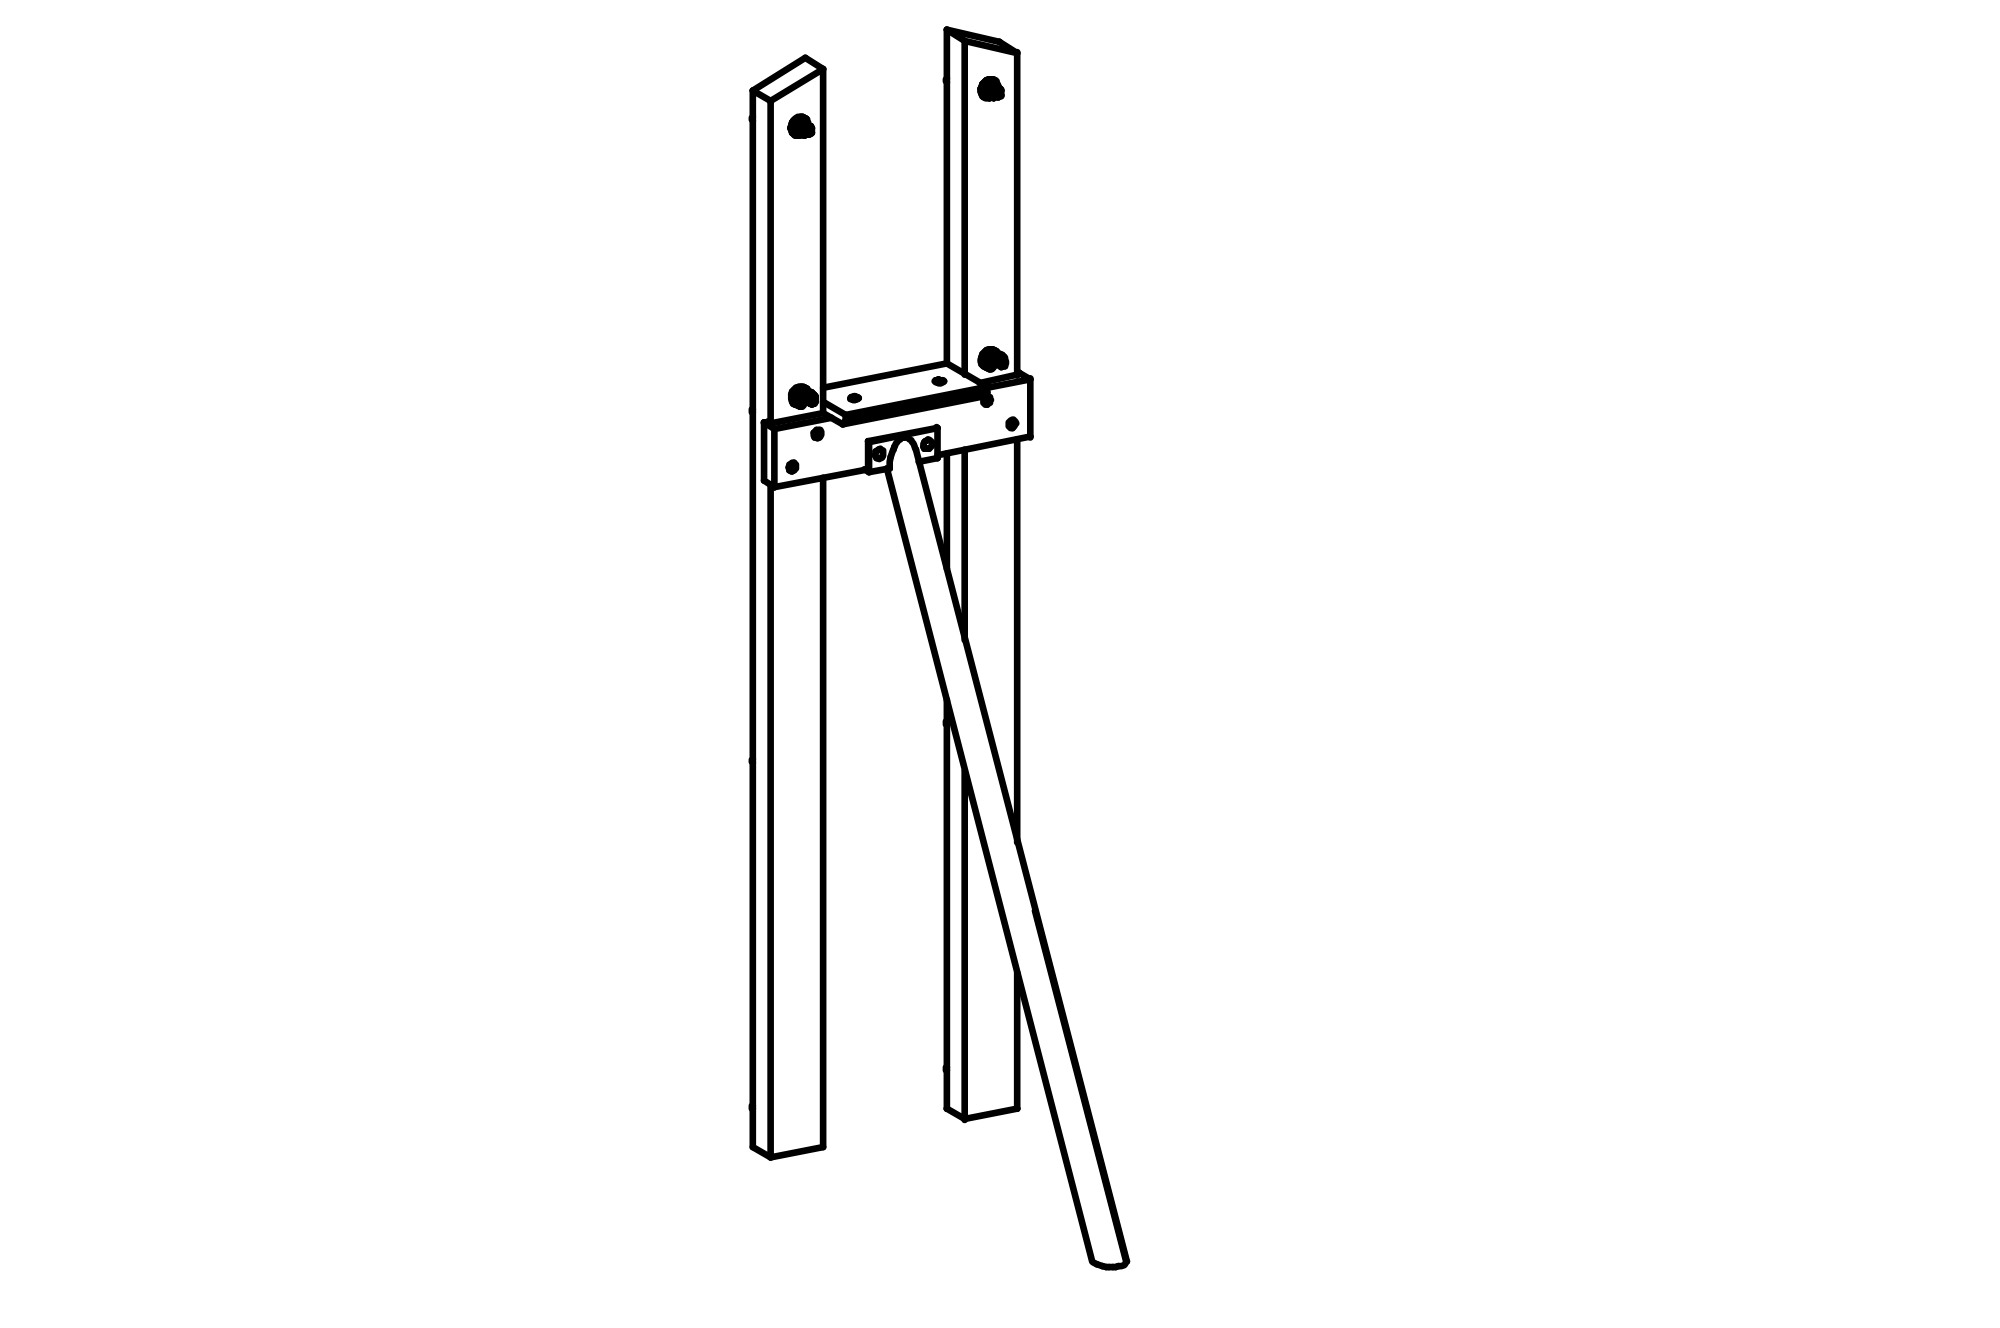 Support Frame for Square Tower with Roof